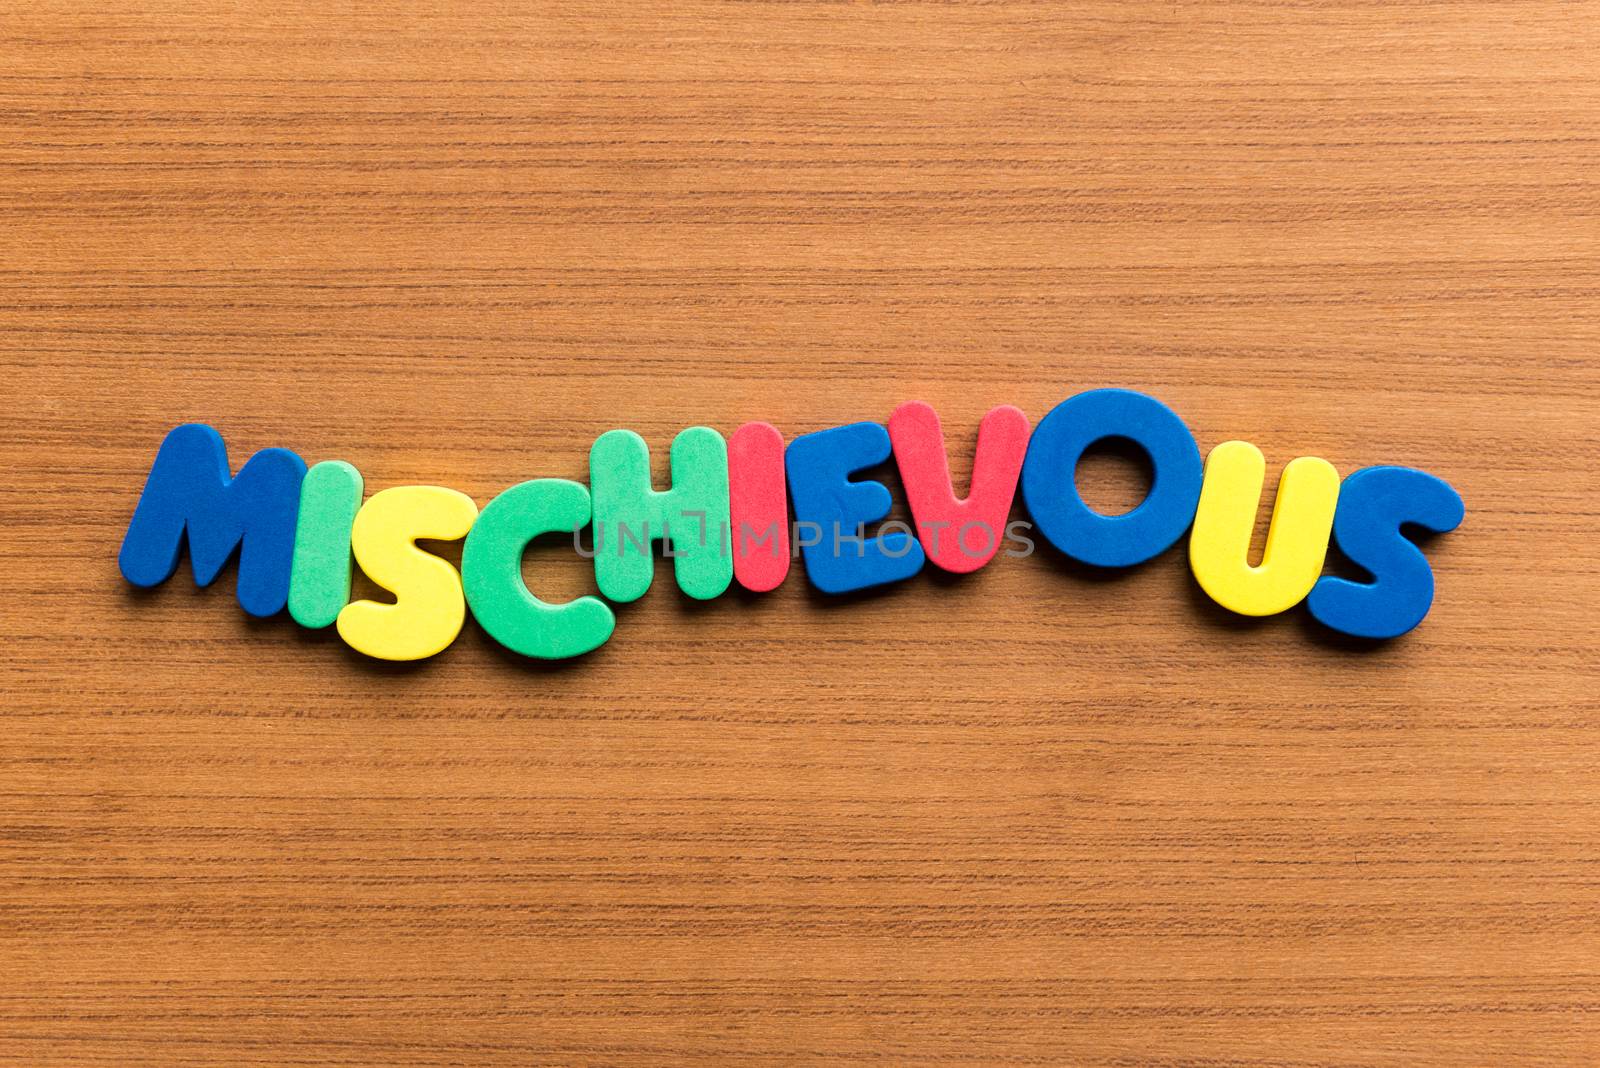 mischievous colorful word on the wooden background